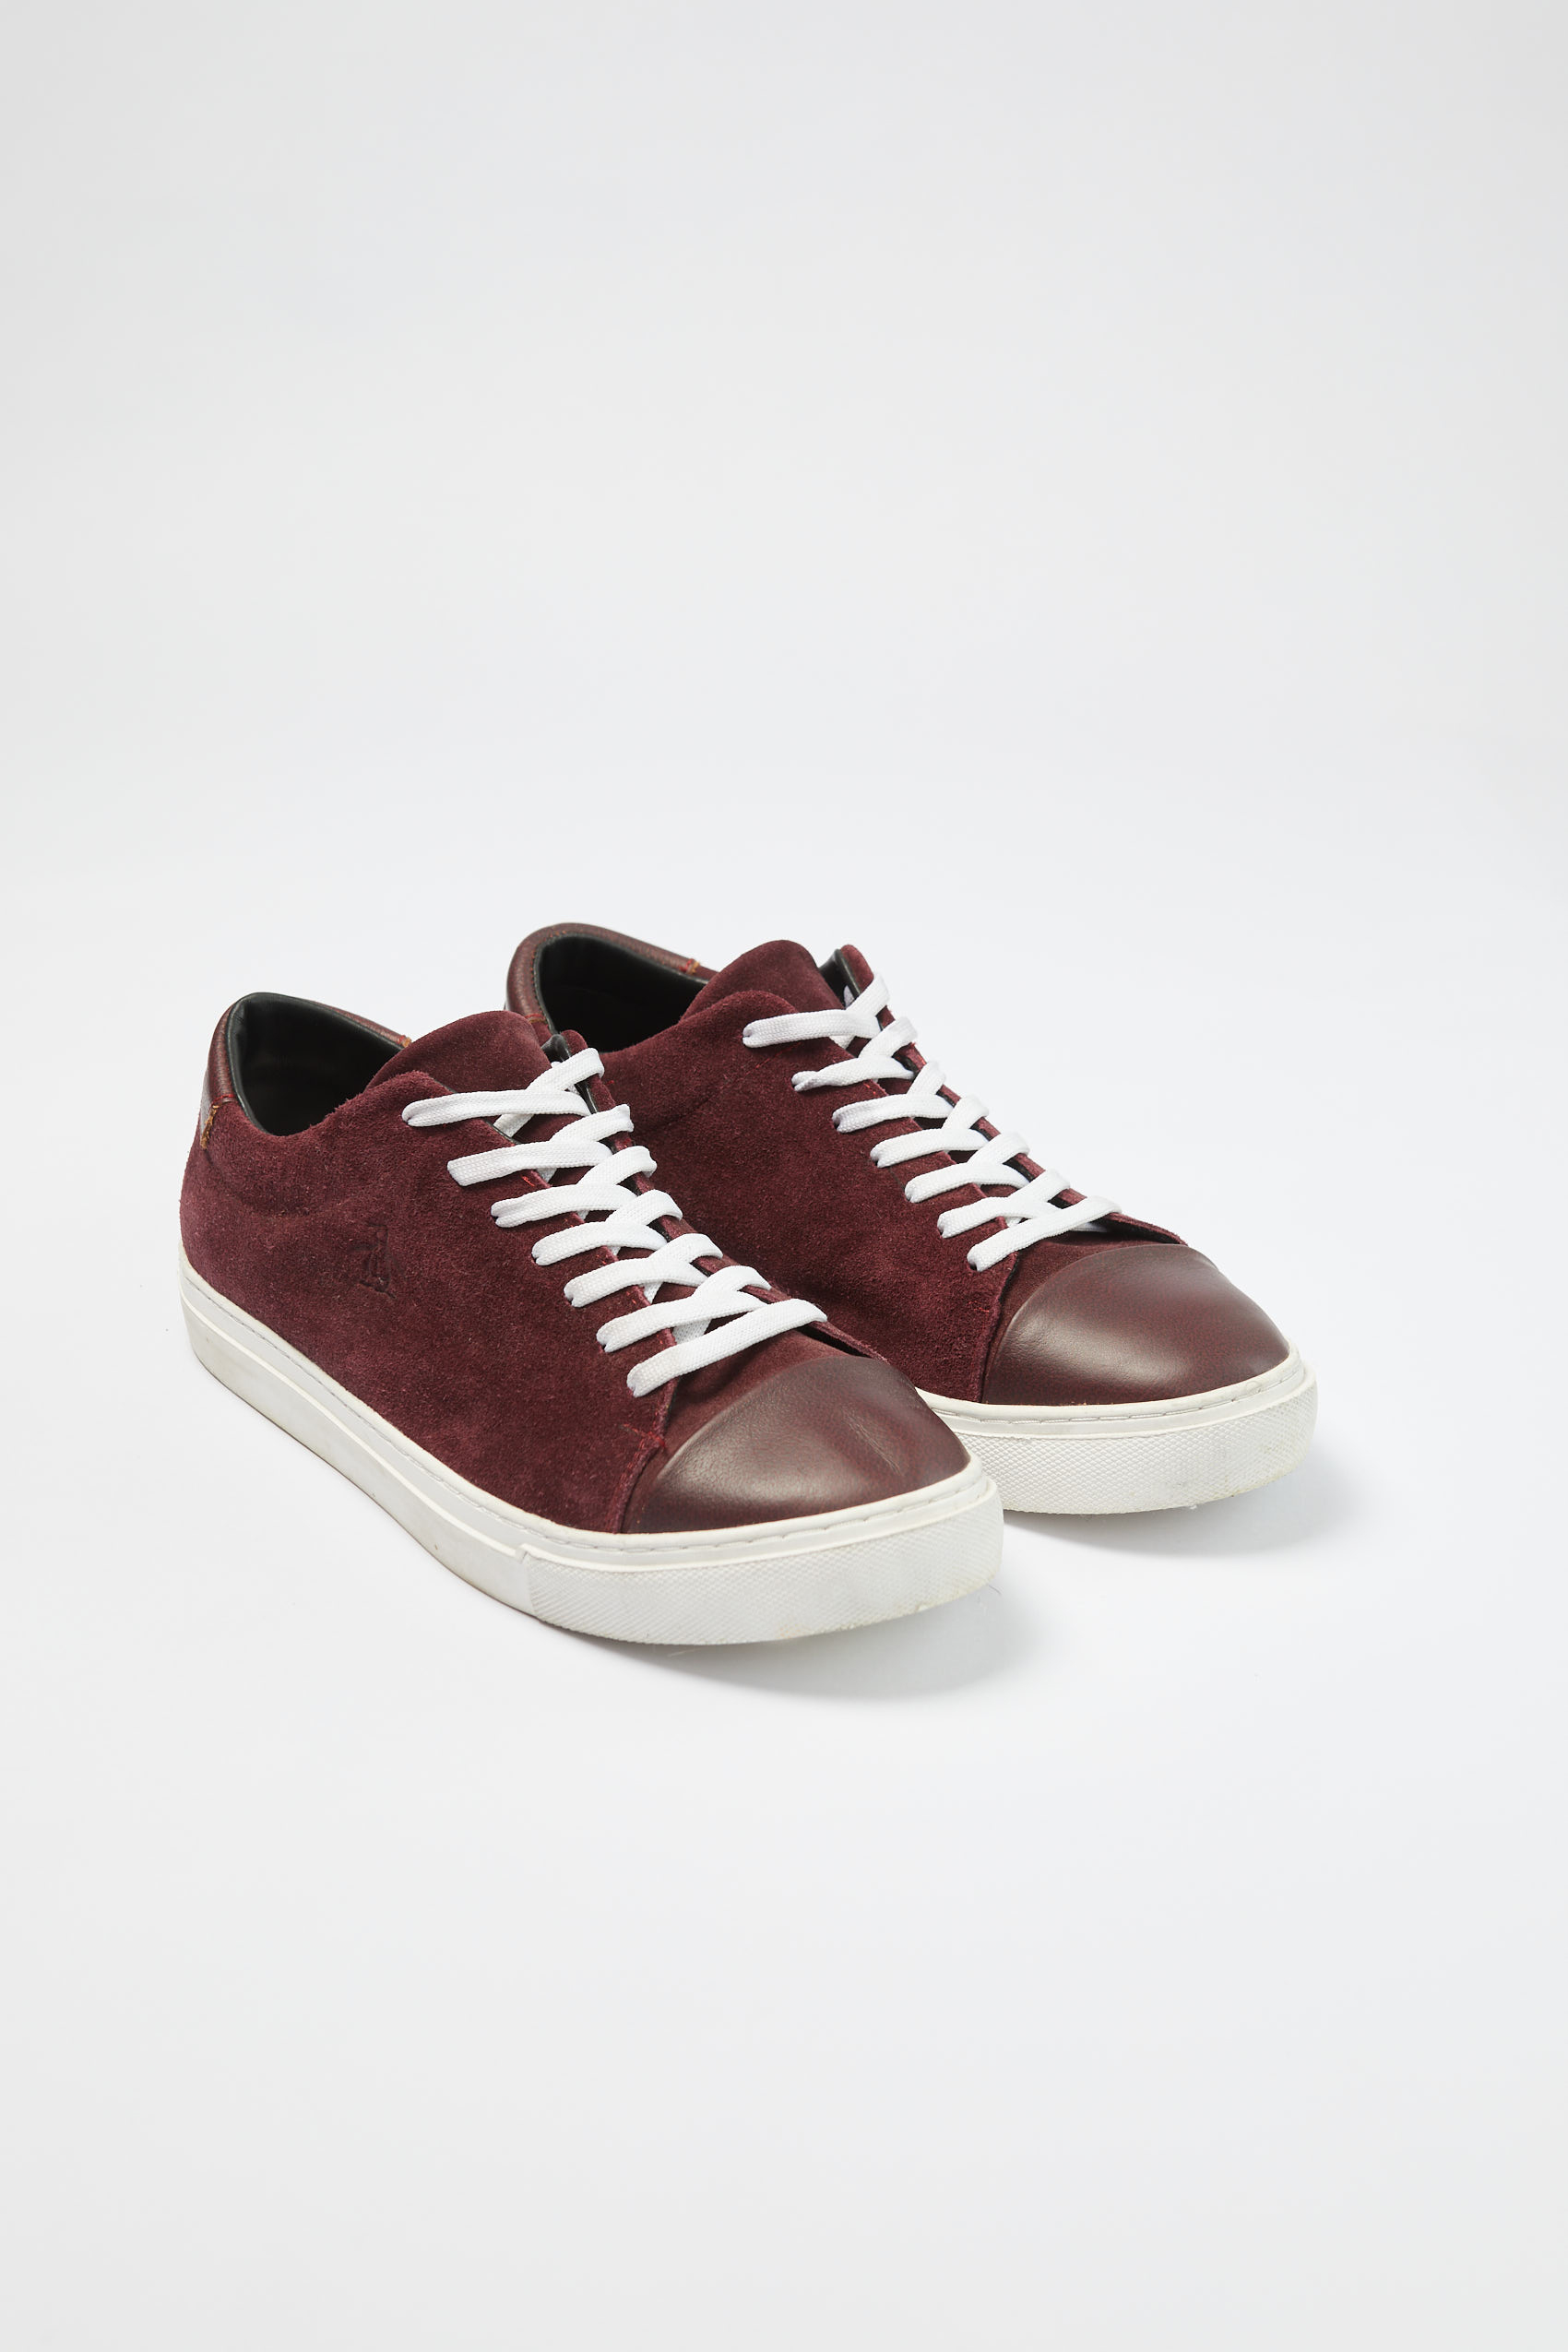 penguin_suede-sneakers_39-30-2022__picture-27083